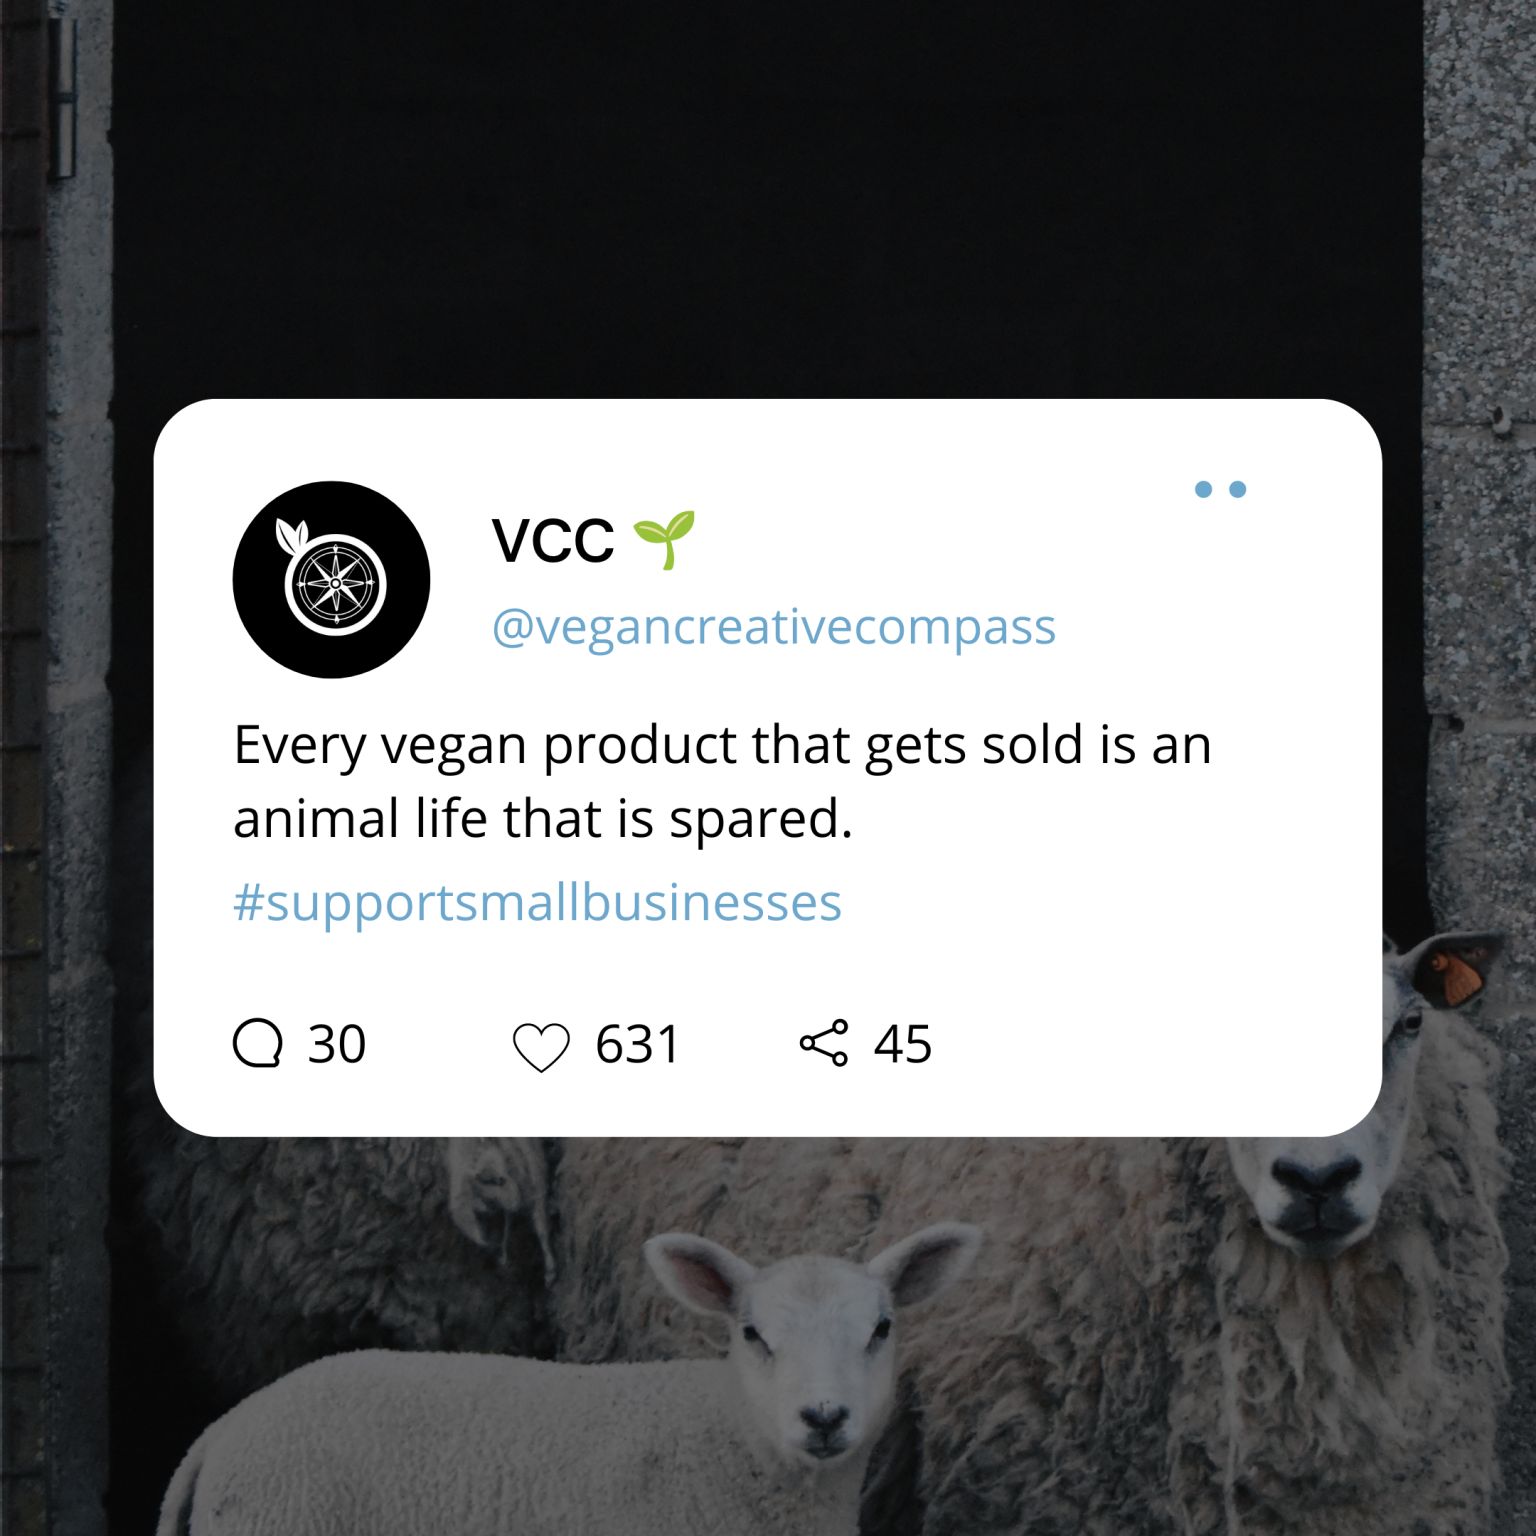 "Every vegan product that gets sold is an animal life that is spared."